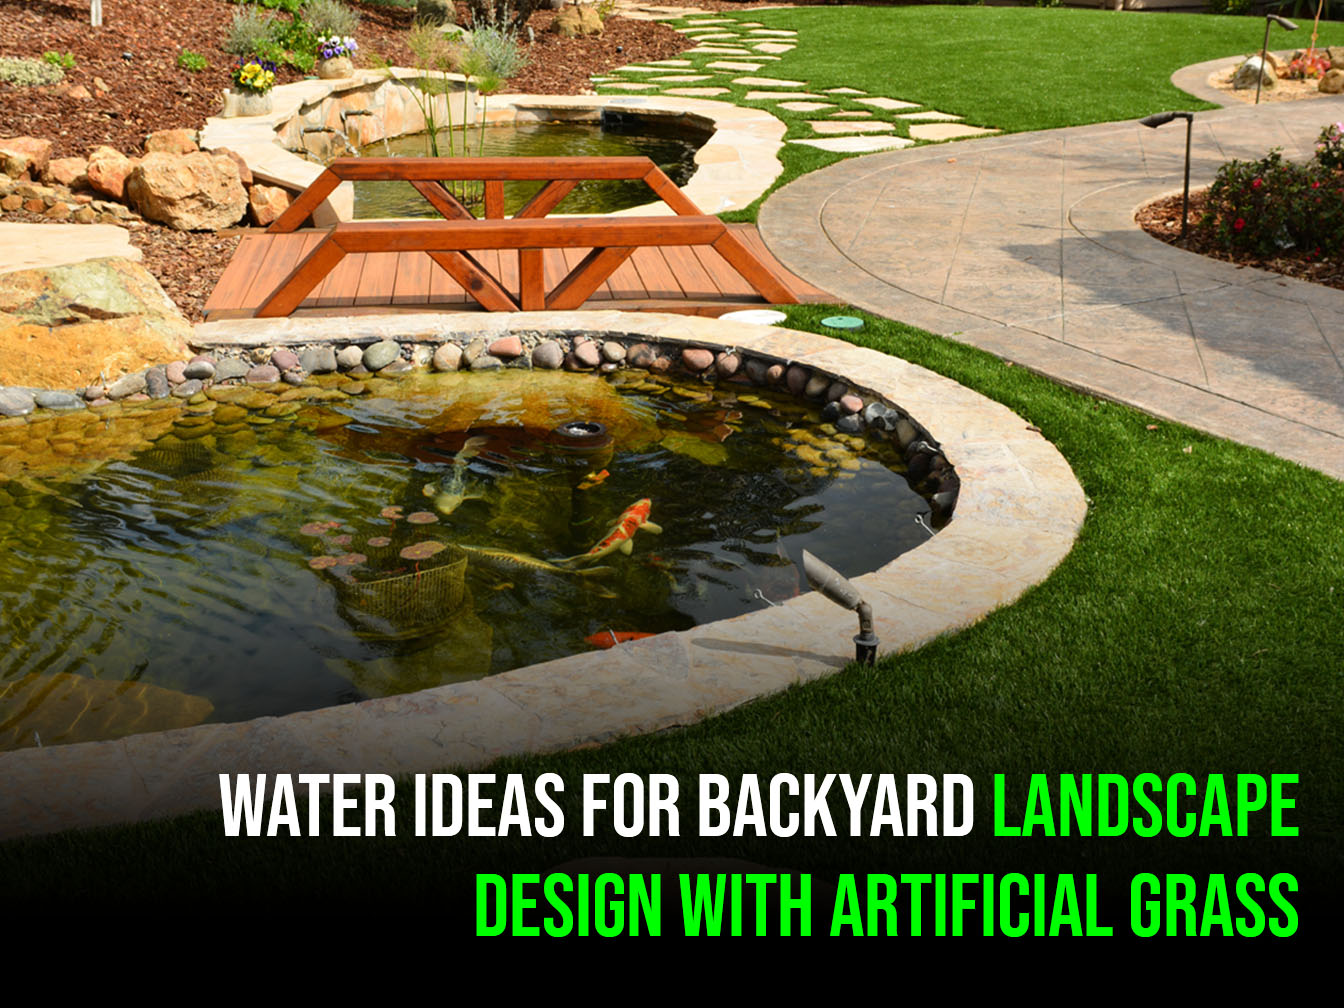 9 Wonderful Water Feature Ideas for Backyard Landscape Design With Artificial Grass